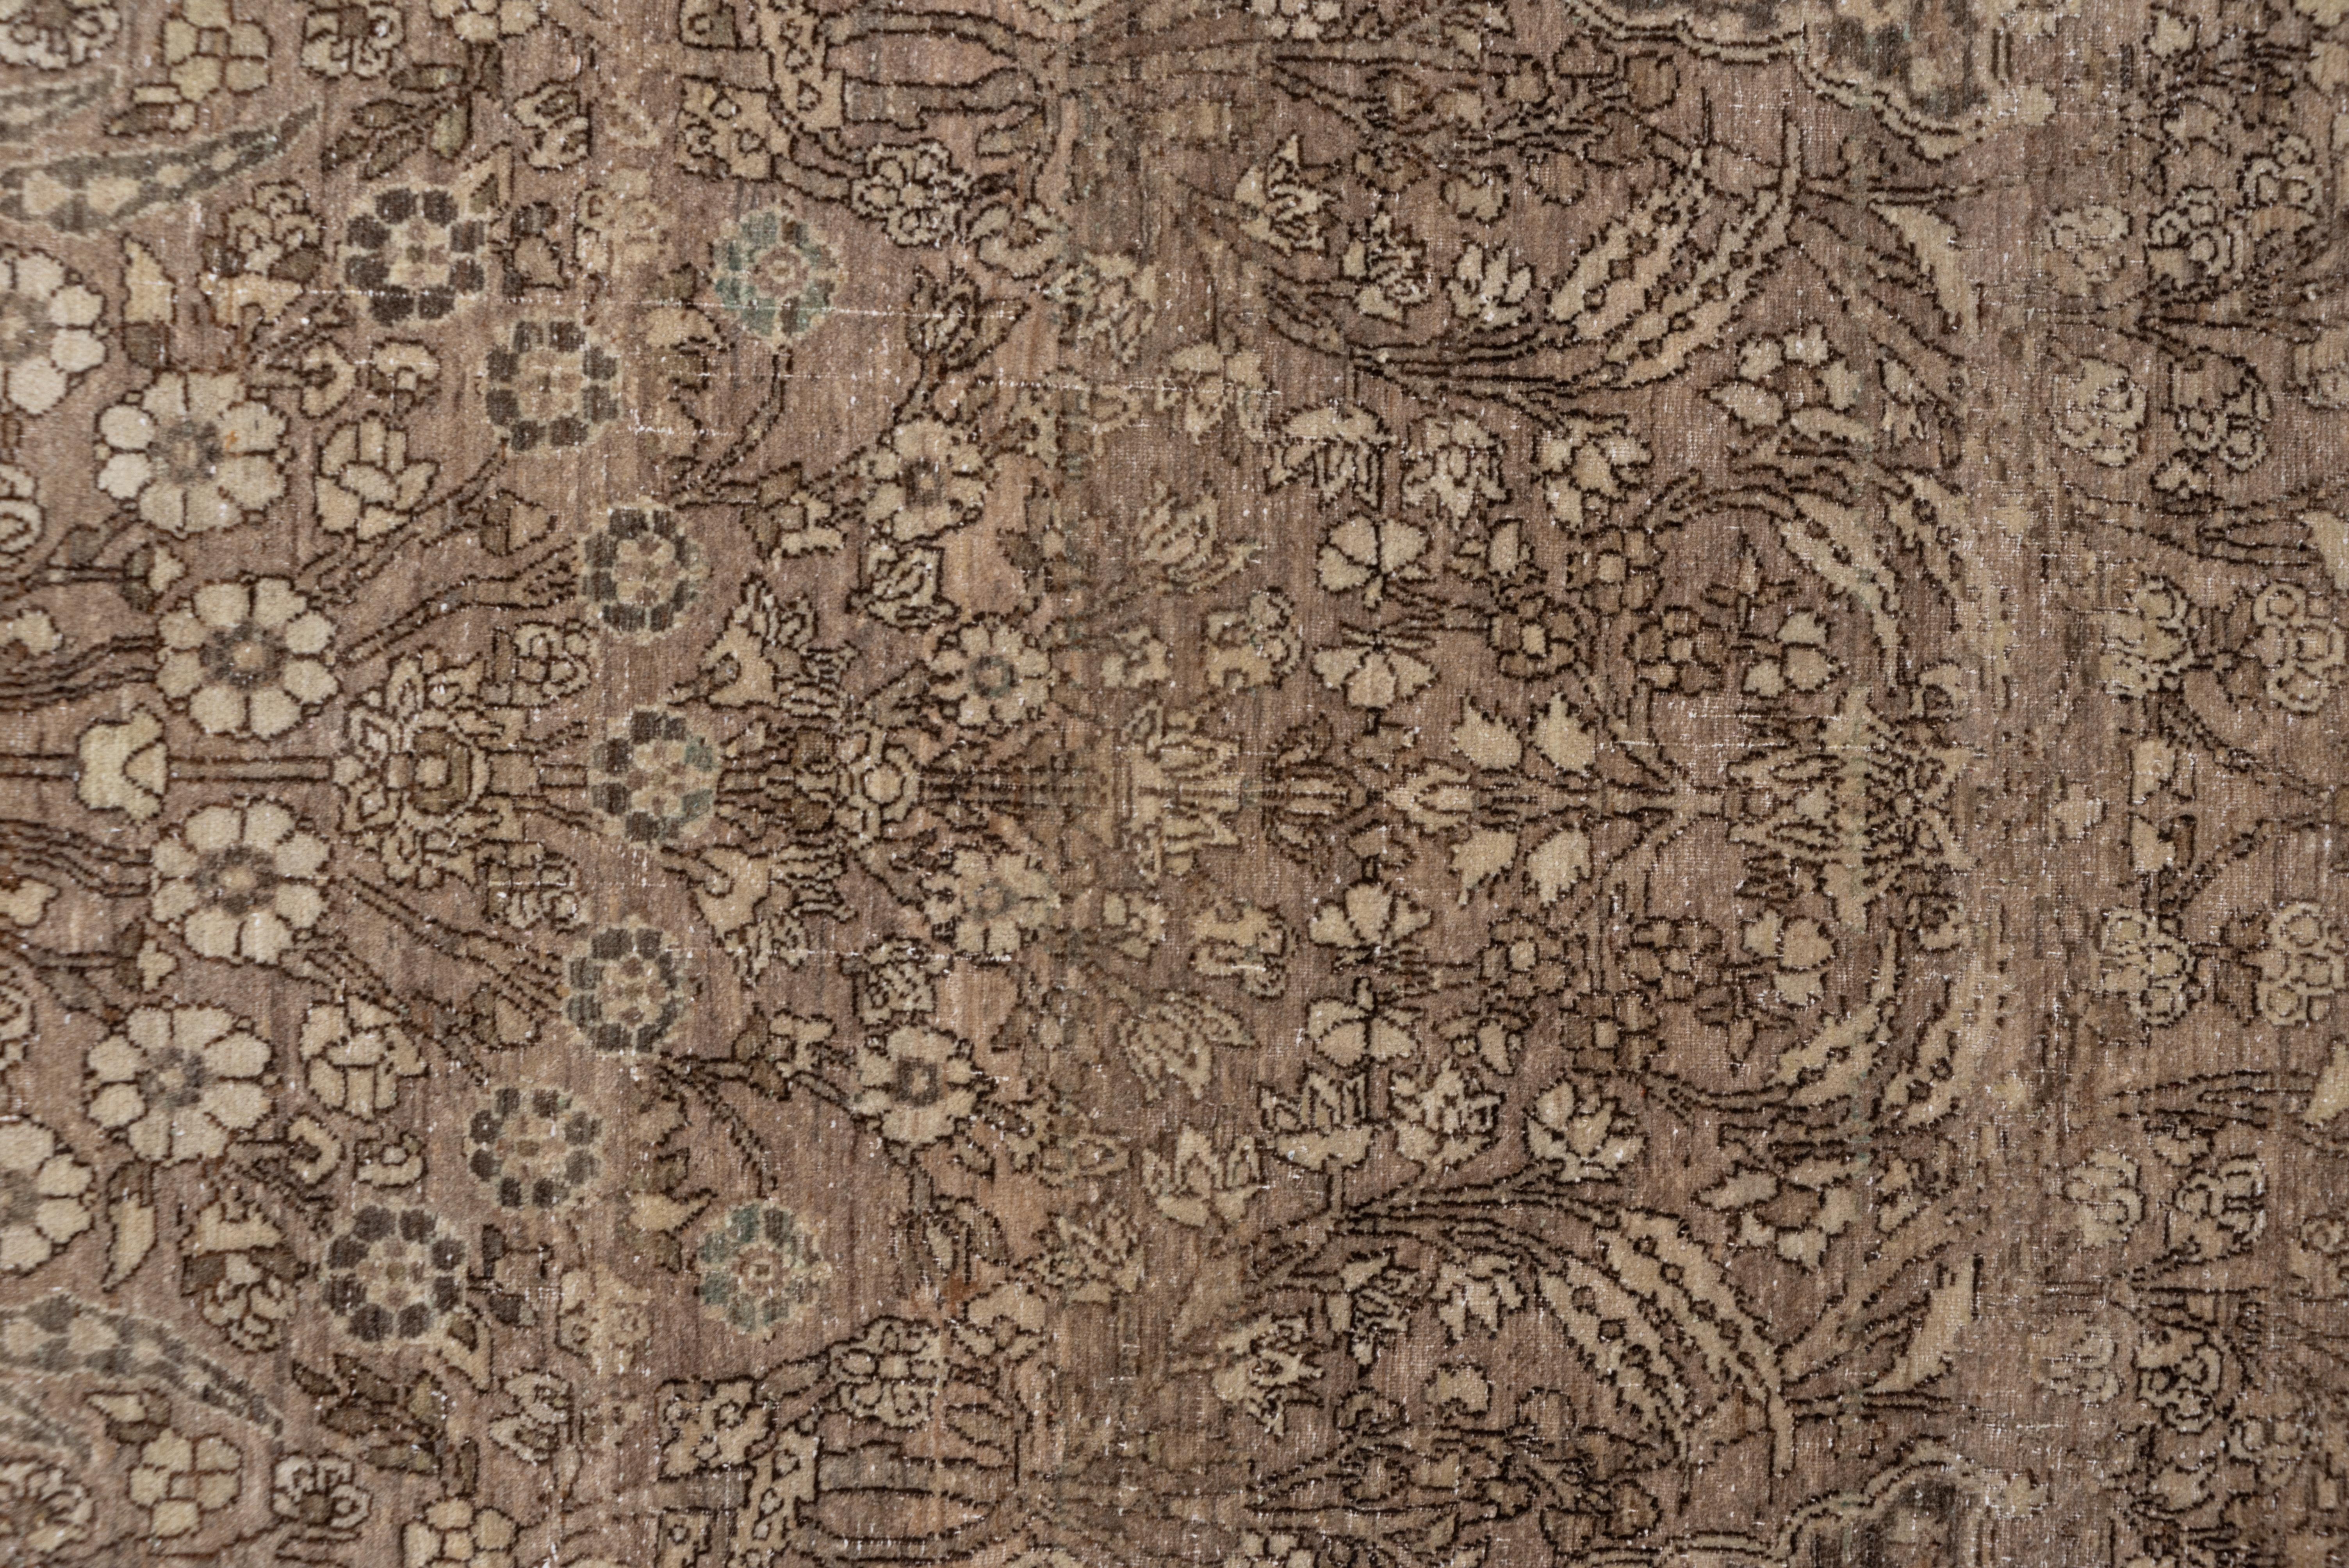 Tabriz Tone on Tone Antique Brown Persian Isfahan Rug, Allover Floral Field, circa 1920